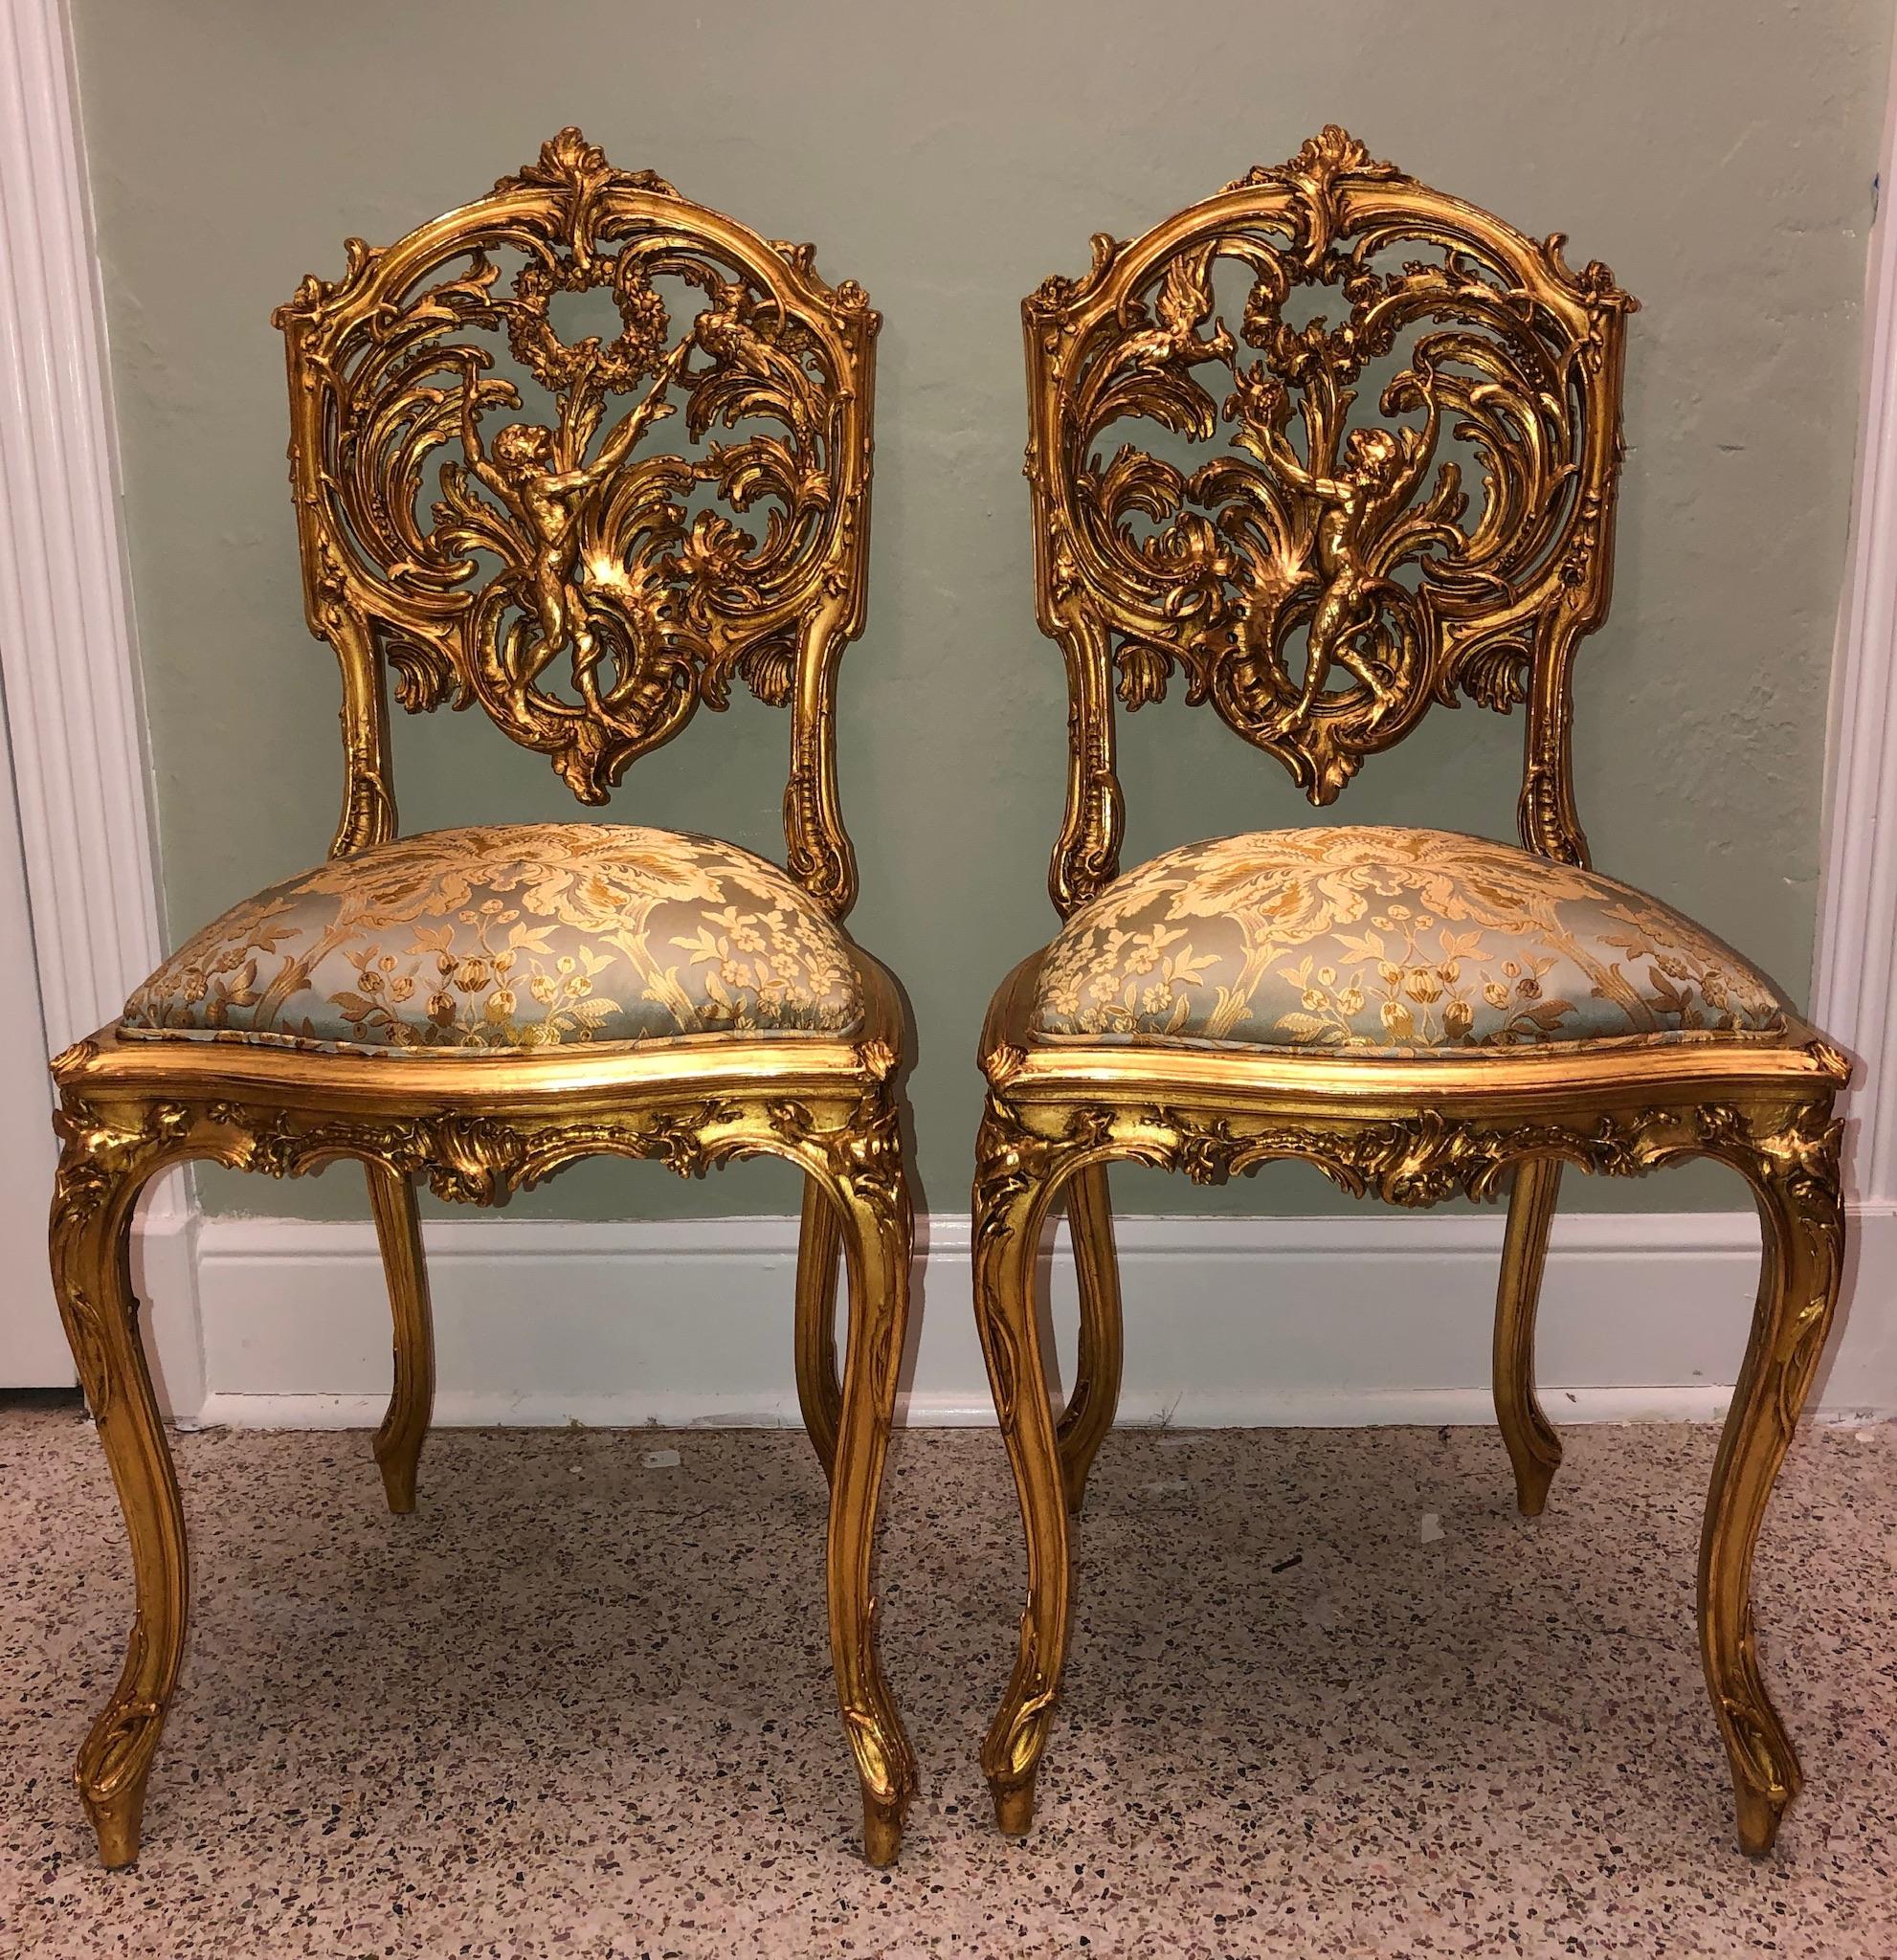 Extraordinary (true) pair of side chairs sculpted in the 18th century. The seat backs are hand carved wood , in the chinoiserie style of the period , complete with singes et oiseaux. On chair 1 is a large monkey at the center back with a peacock